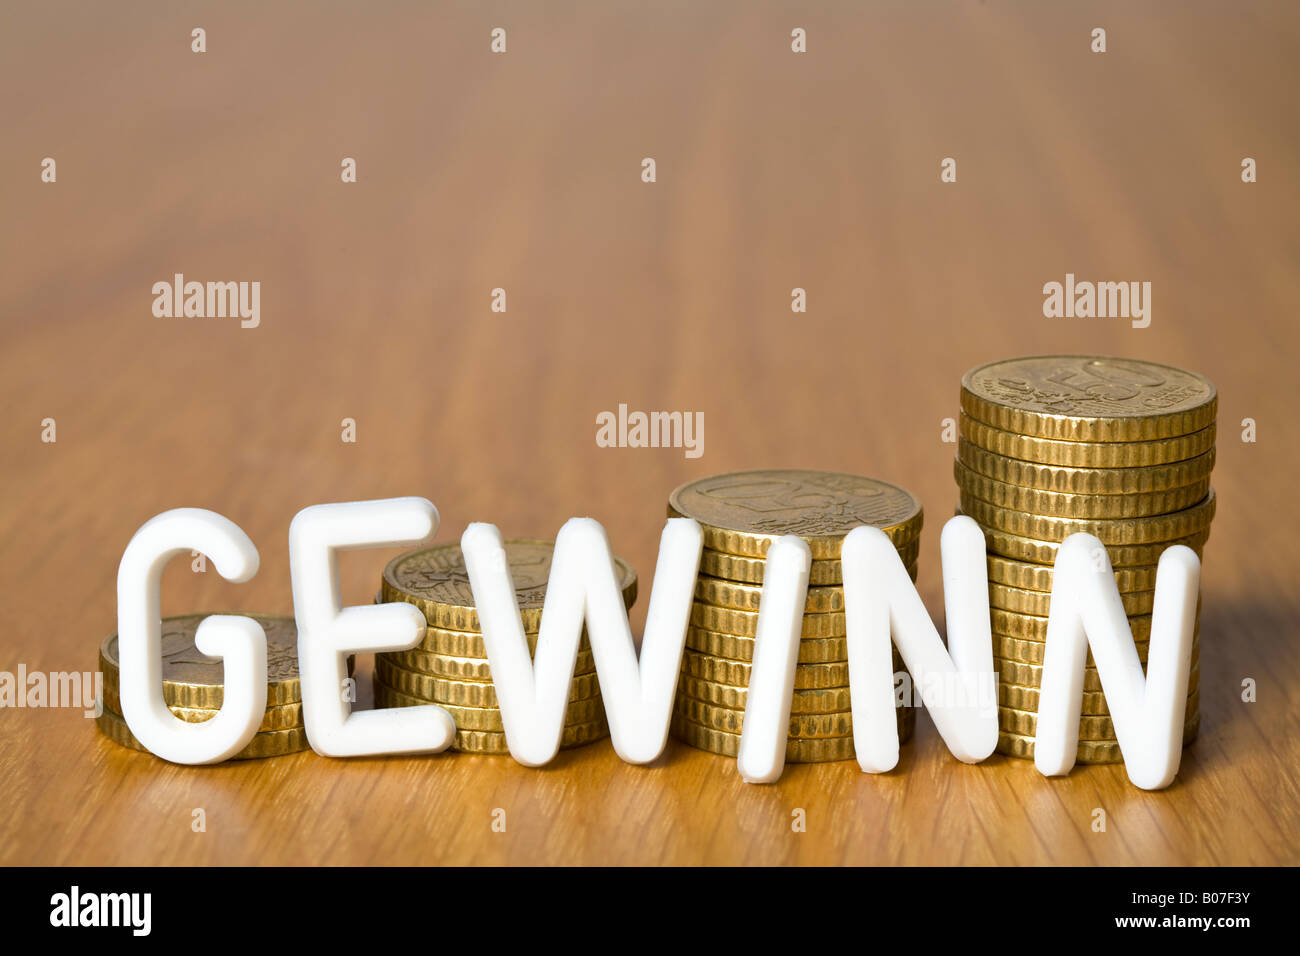 Plastic letters in front of stacks of coins Stock Photo